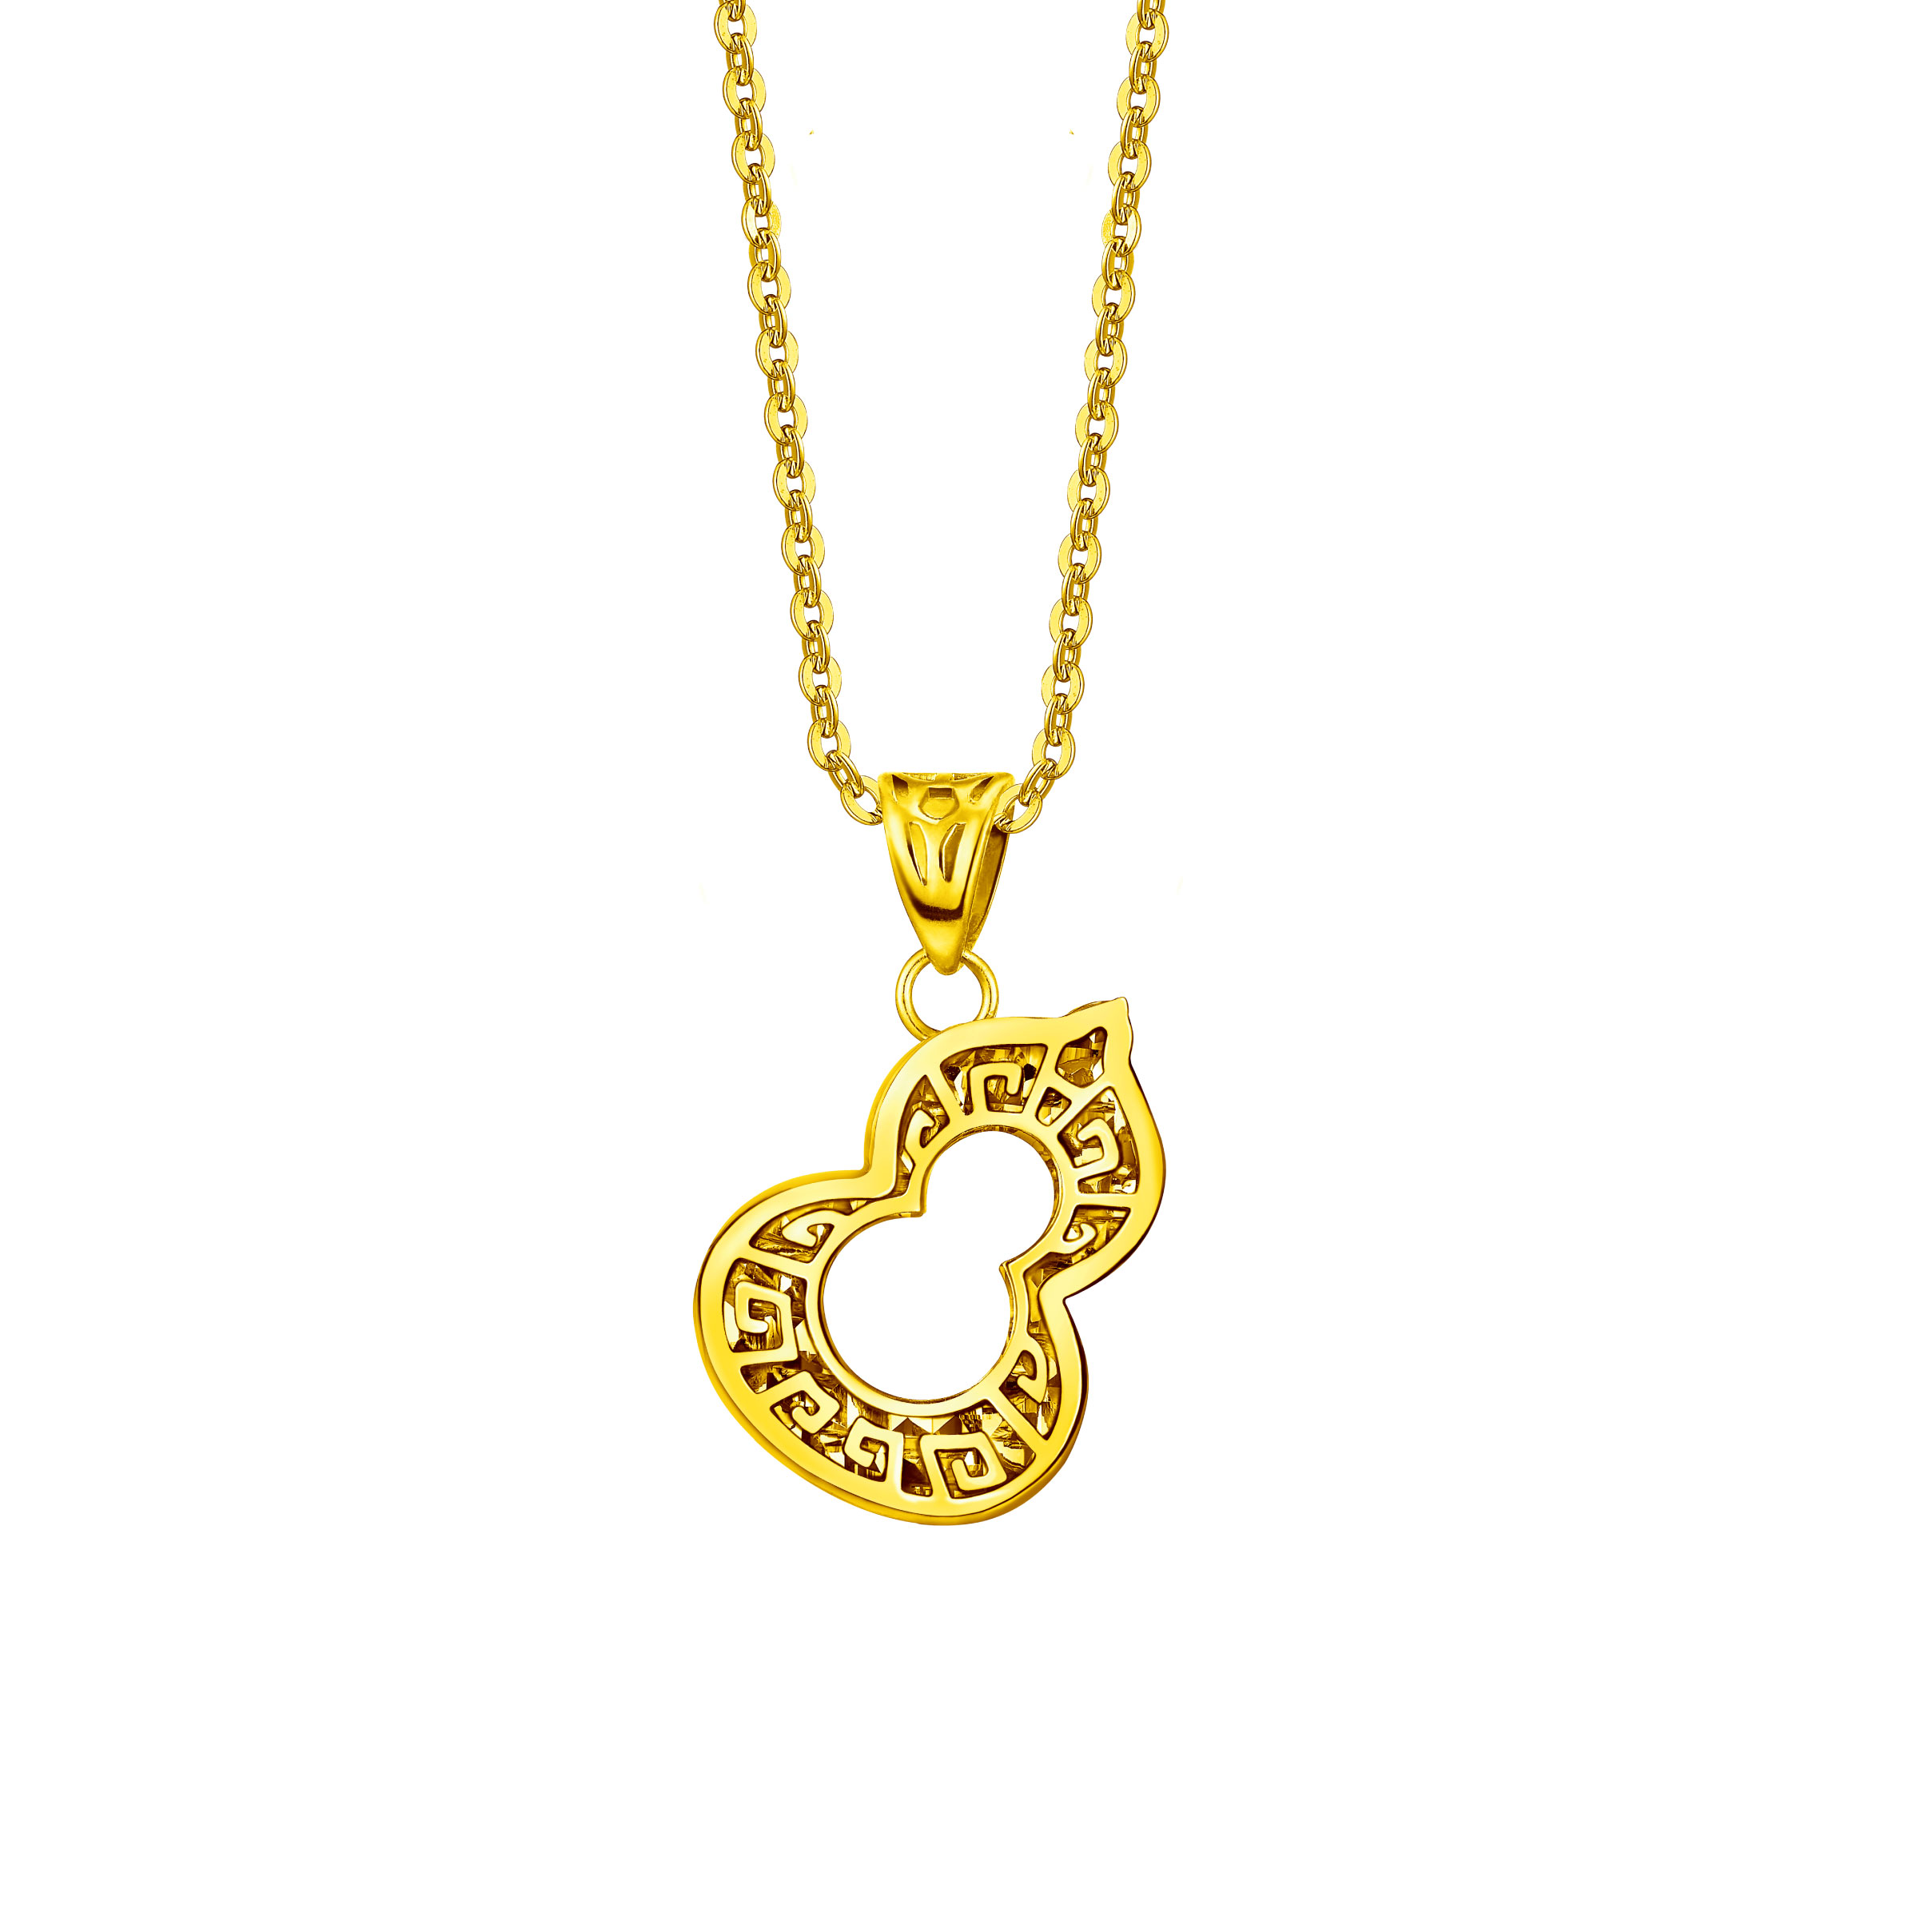 Goldstyle "Gourd" Gold Pendant